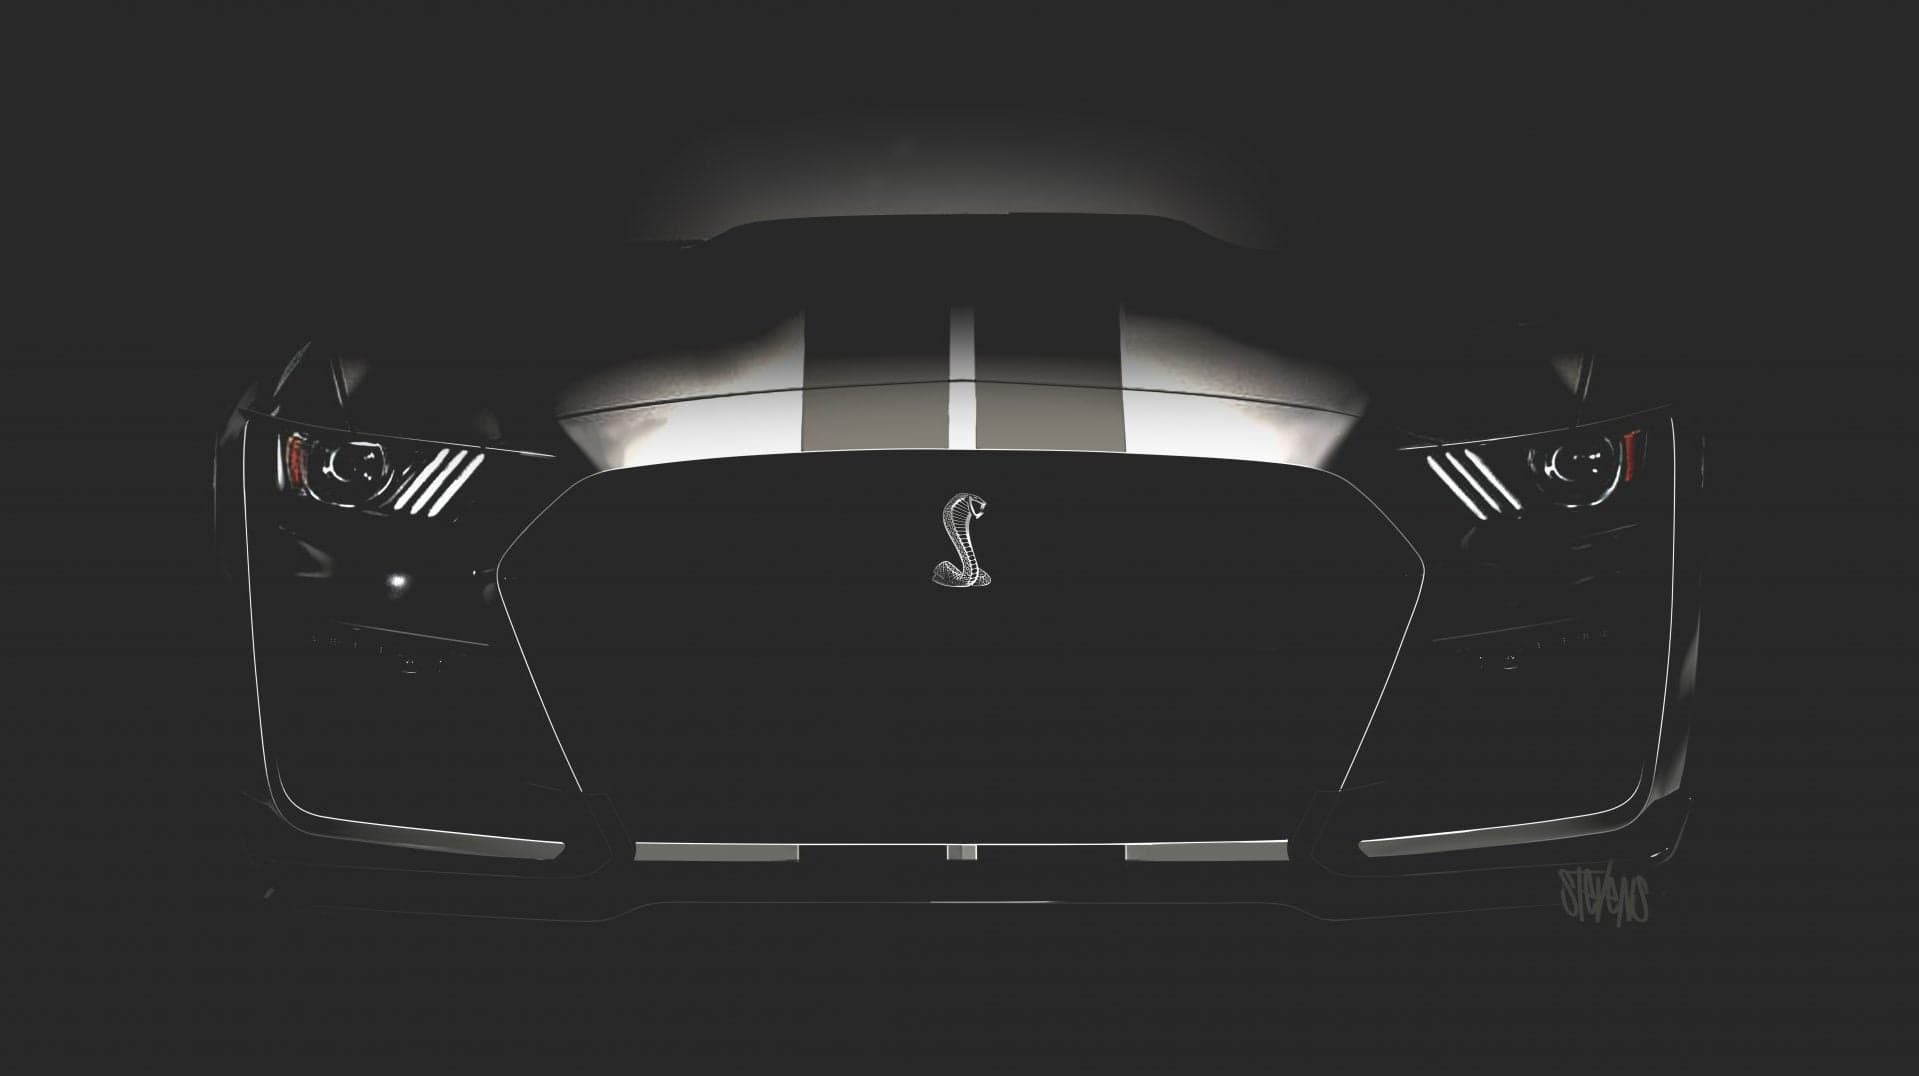 Upcoming Ford Mustang Shelby GT500 Might Ditch Manual Transmission: Report